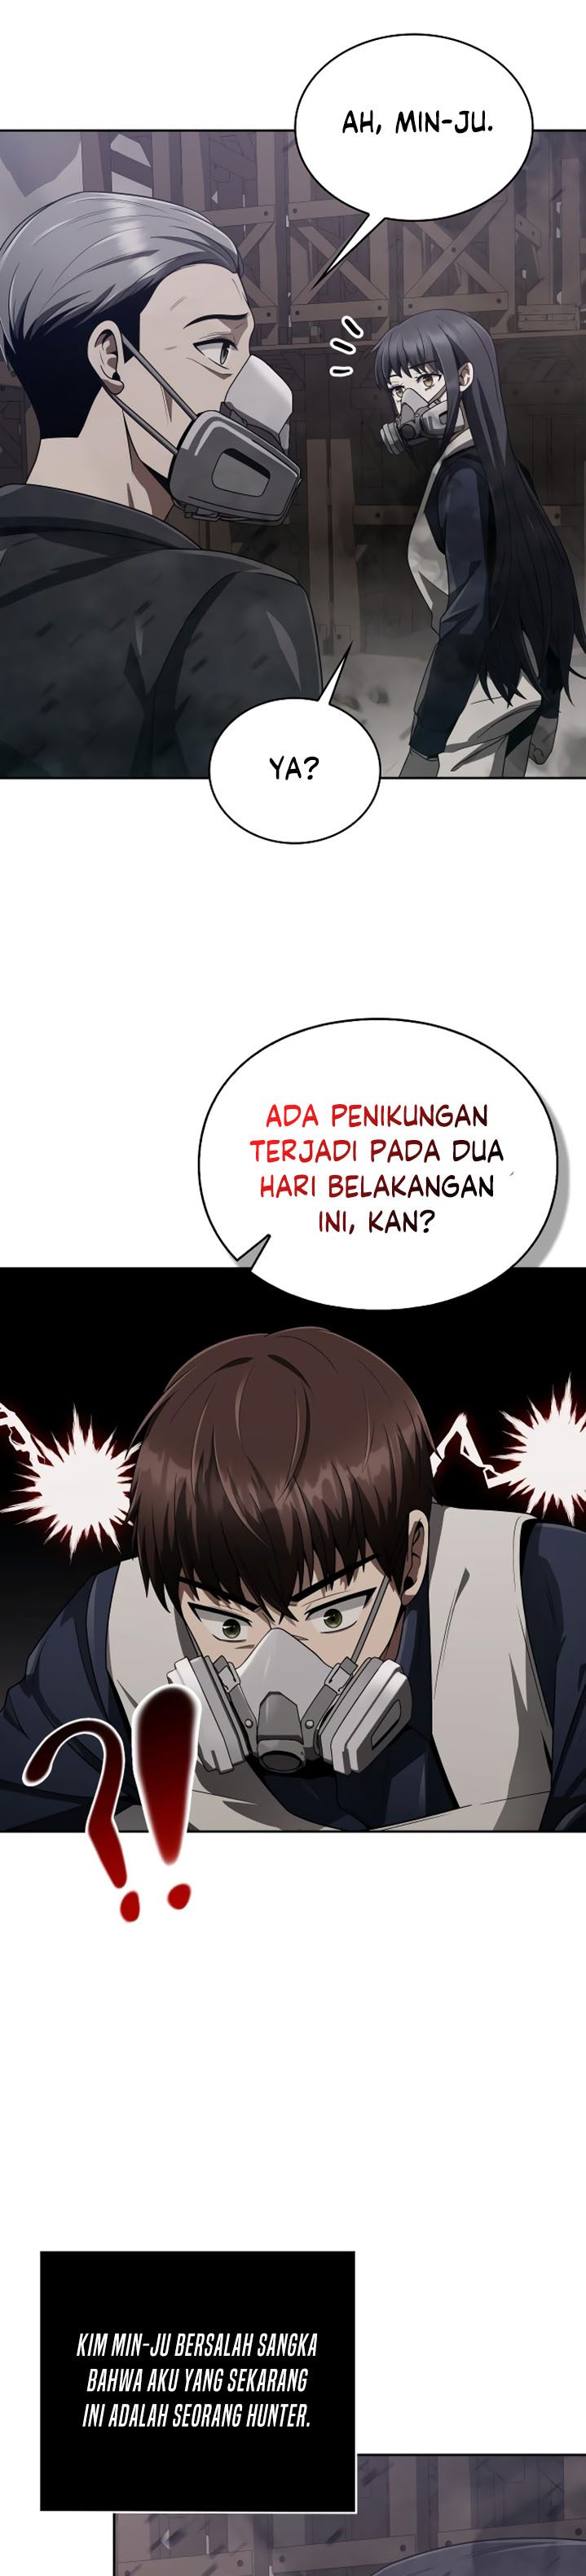 Dilarang COPAS - situs resmi www.mangacanblog.com - Komik clever cleaning life of the returned genius hunter 011 - chapter 11 12 Indonesia clever cleaning life of the returned genius hunter 011 - chapter 11 Terbaru 25|Baca Manga Komik Indonesia|Mangacan